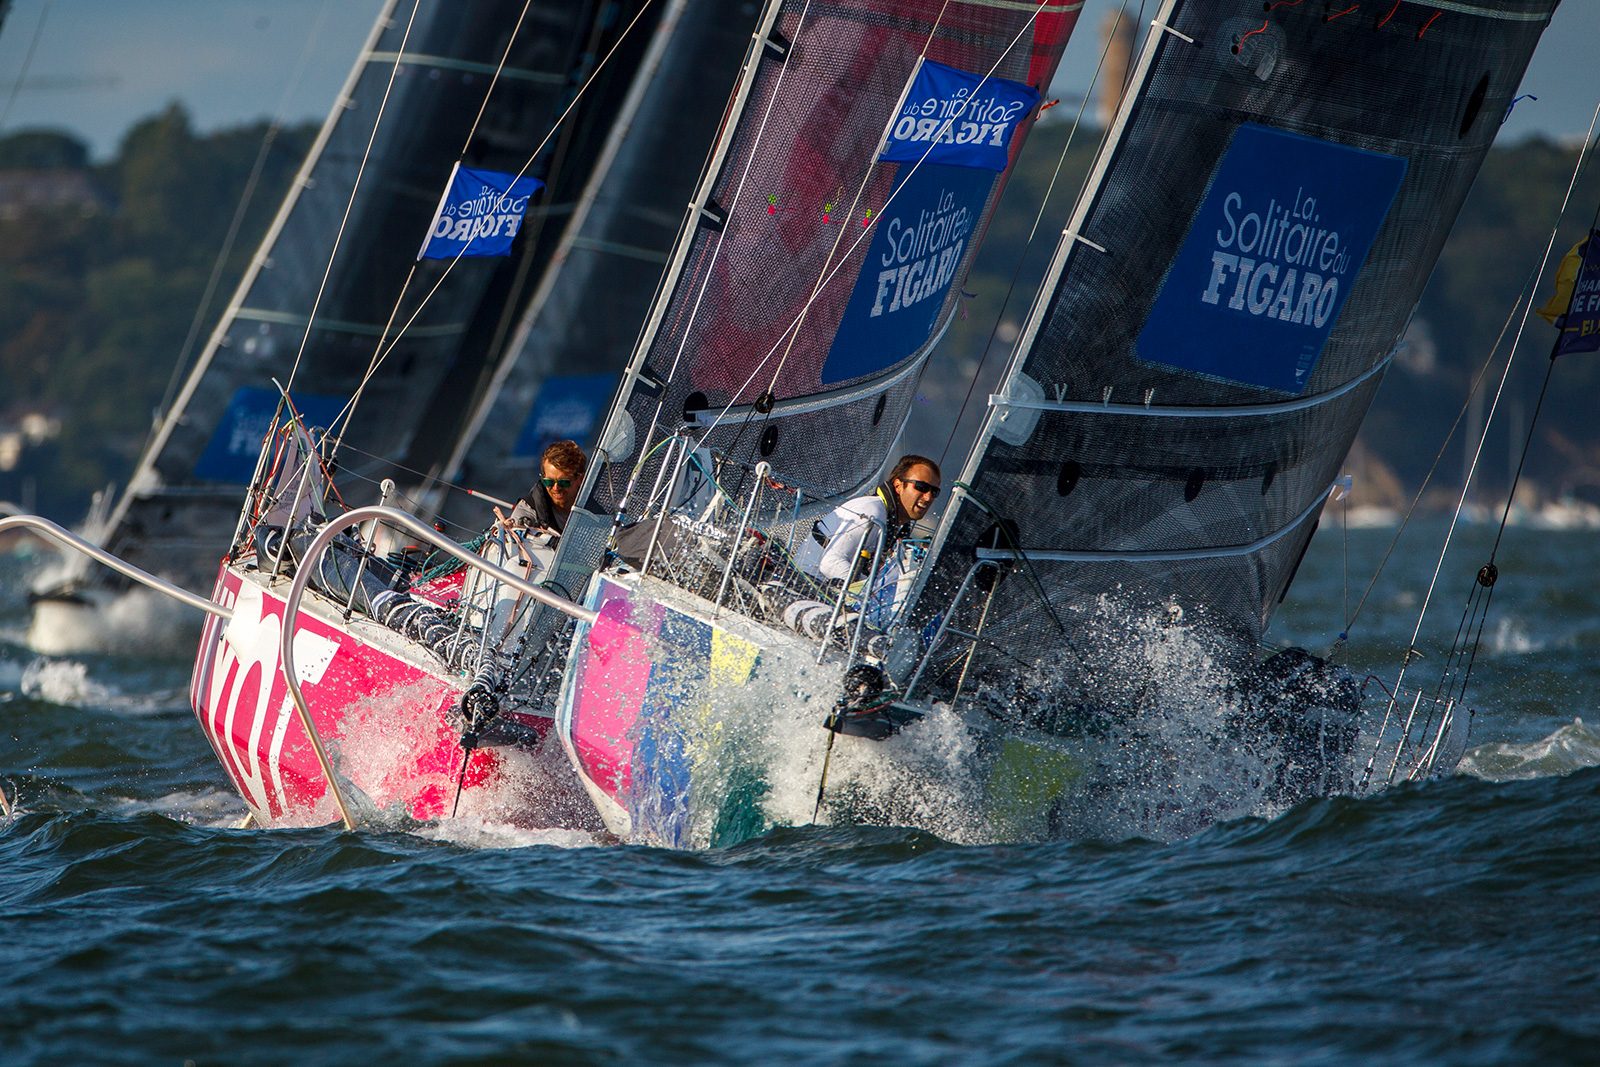 Skippers Solitaire du Figaro 2021